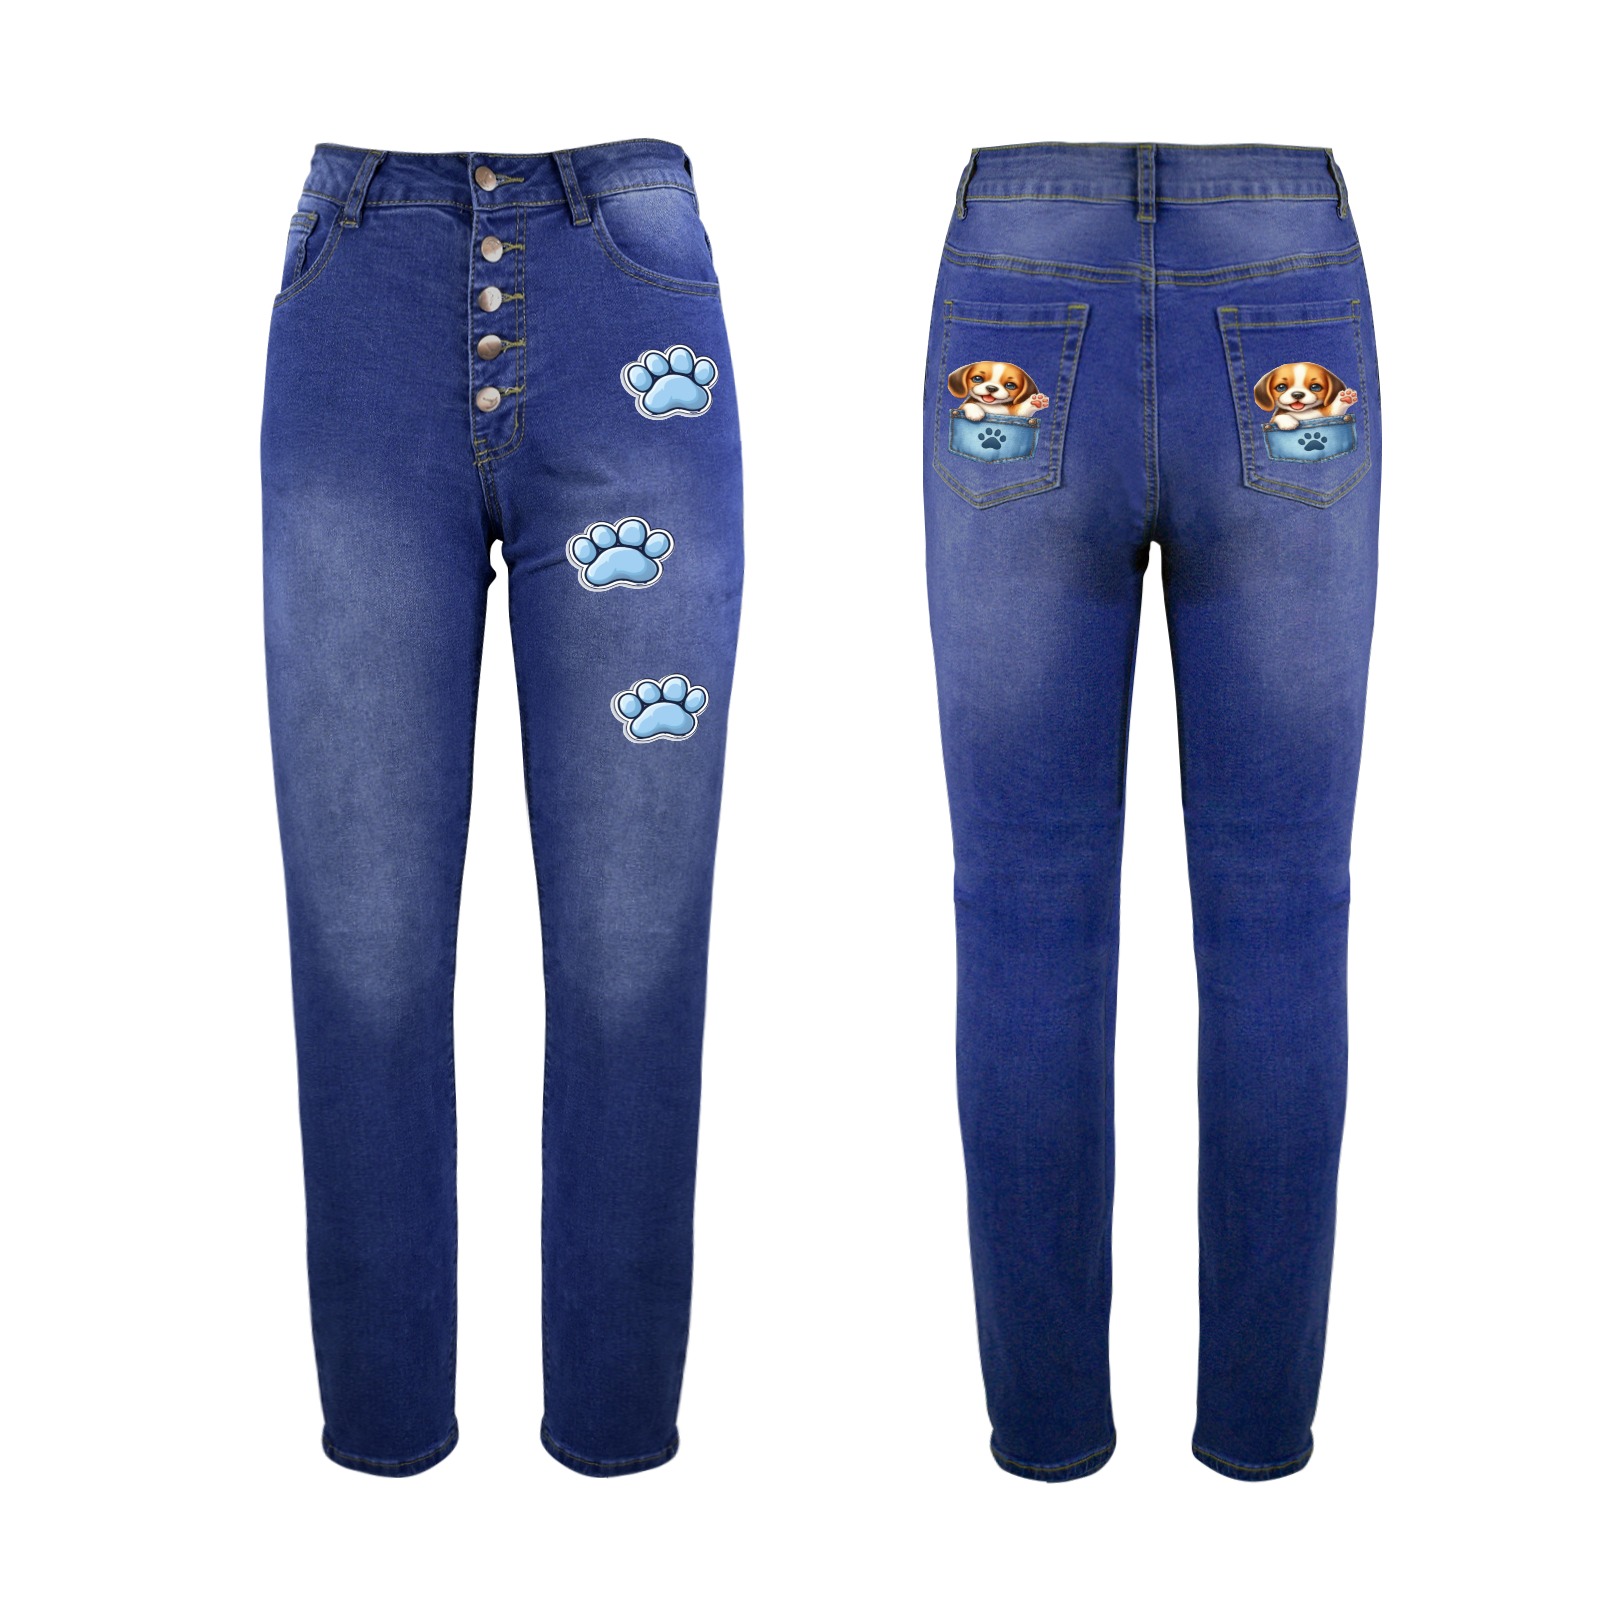 Beagle Lover Women's Jeans (Front&Back Printing)